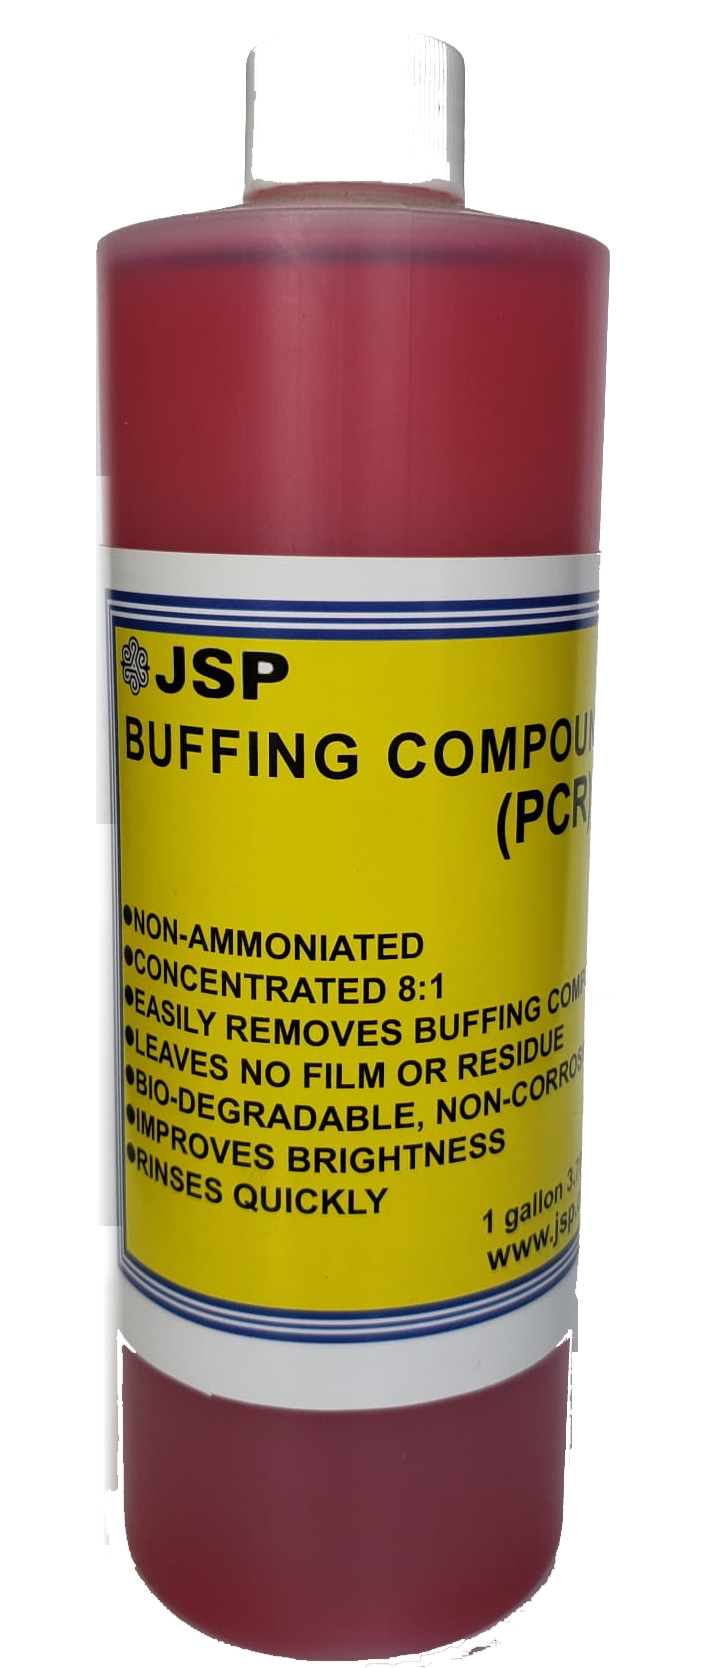 BUFFING COMPOUND REMOVER, 16 ounces